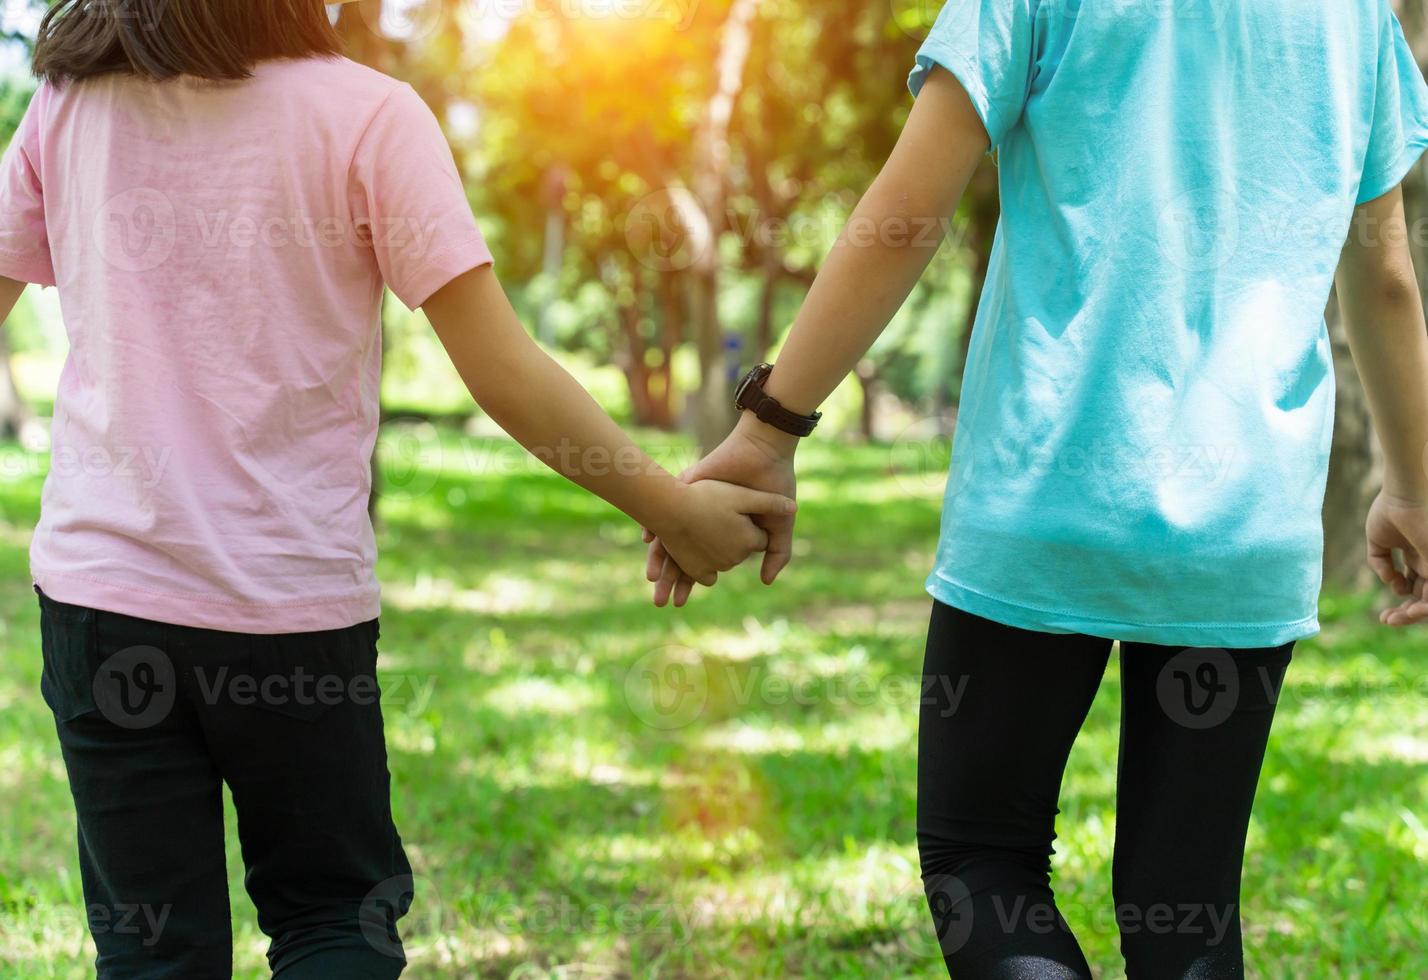 Two sister holding hands in the park in warm spring day. Happy friendship family concept. photo